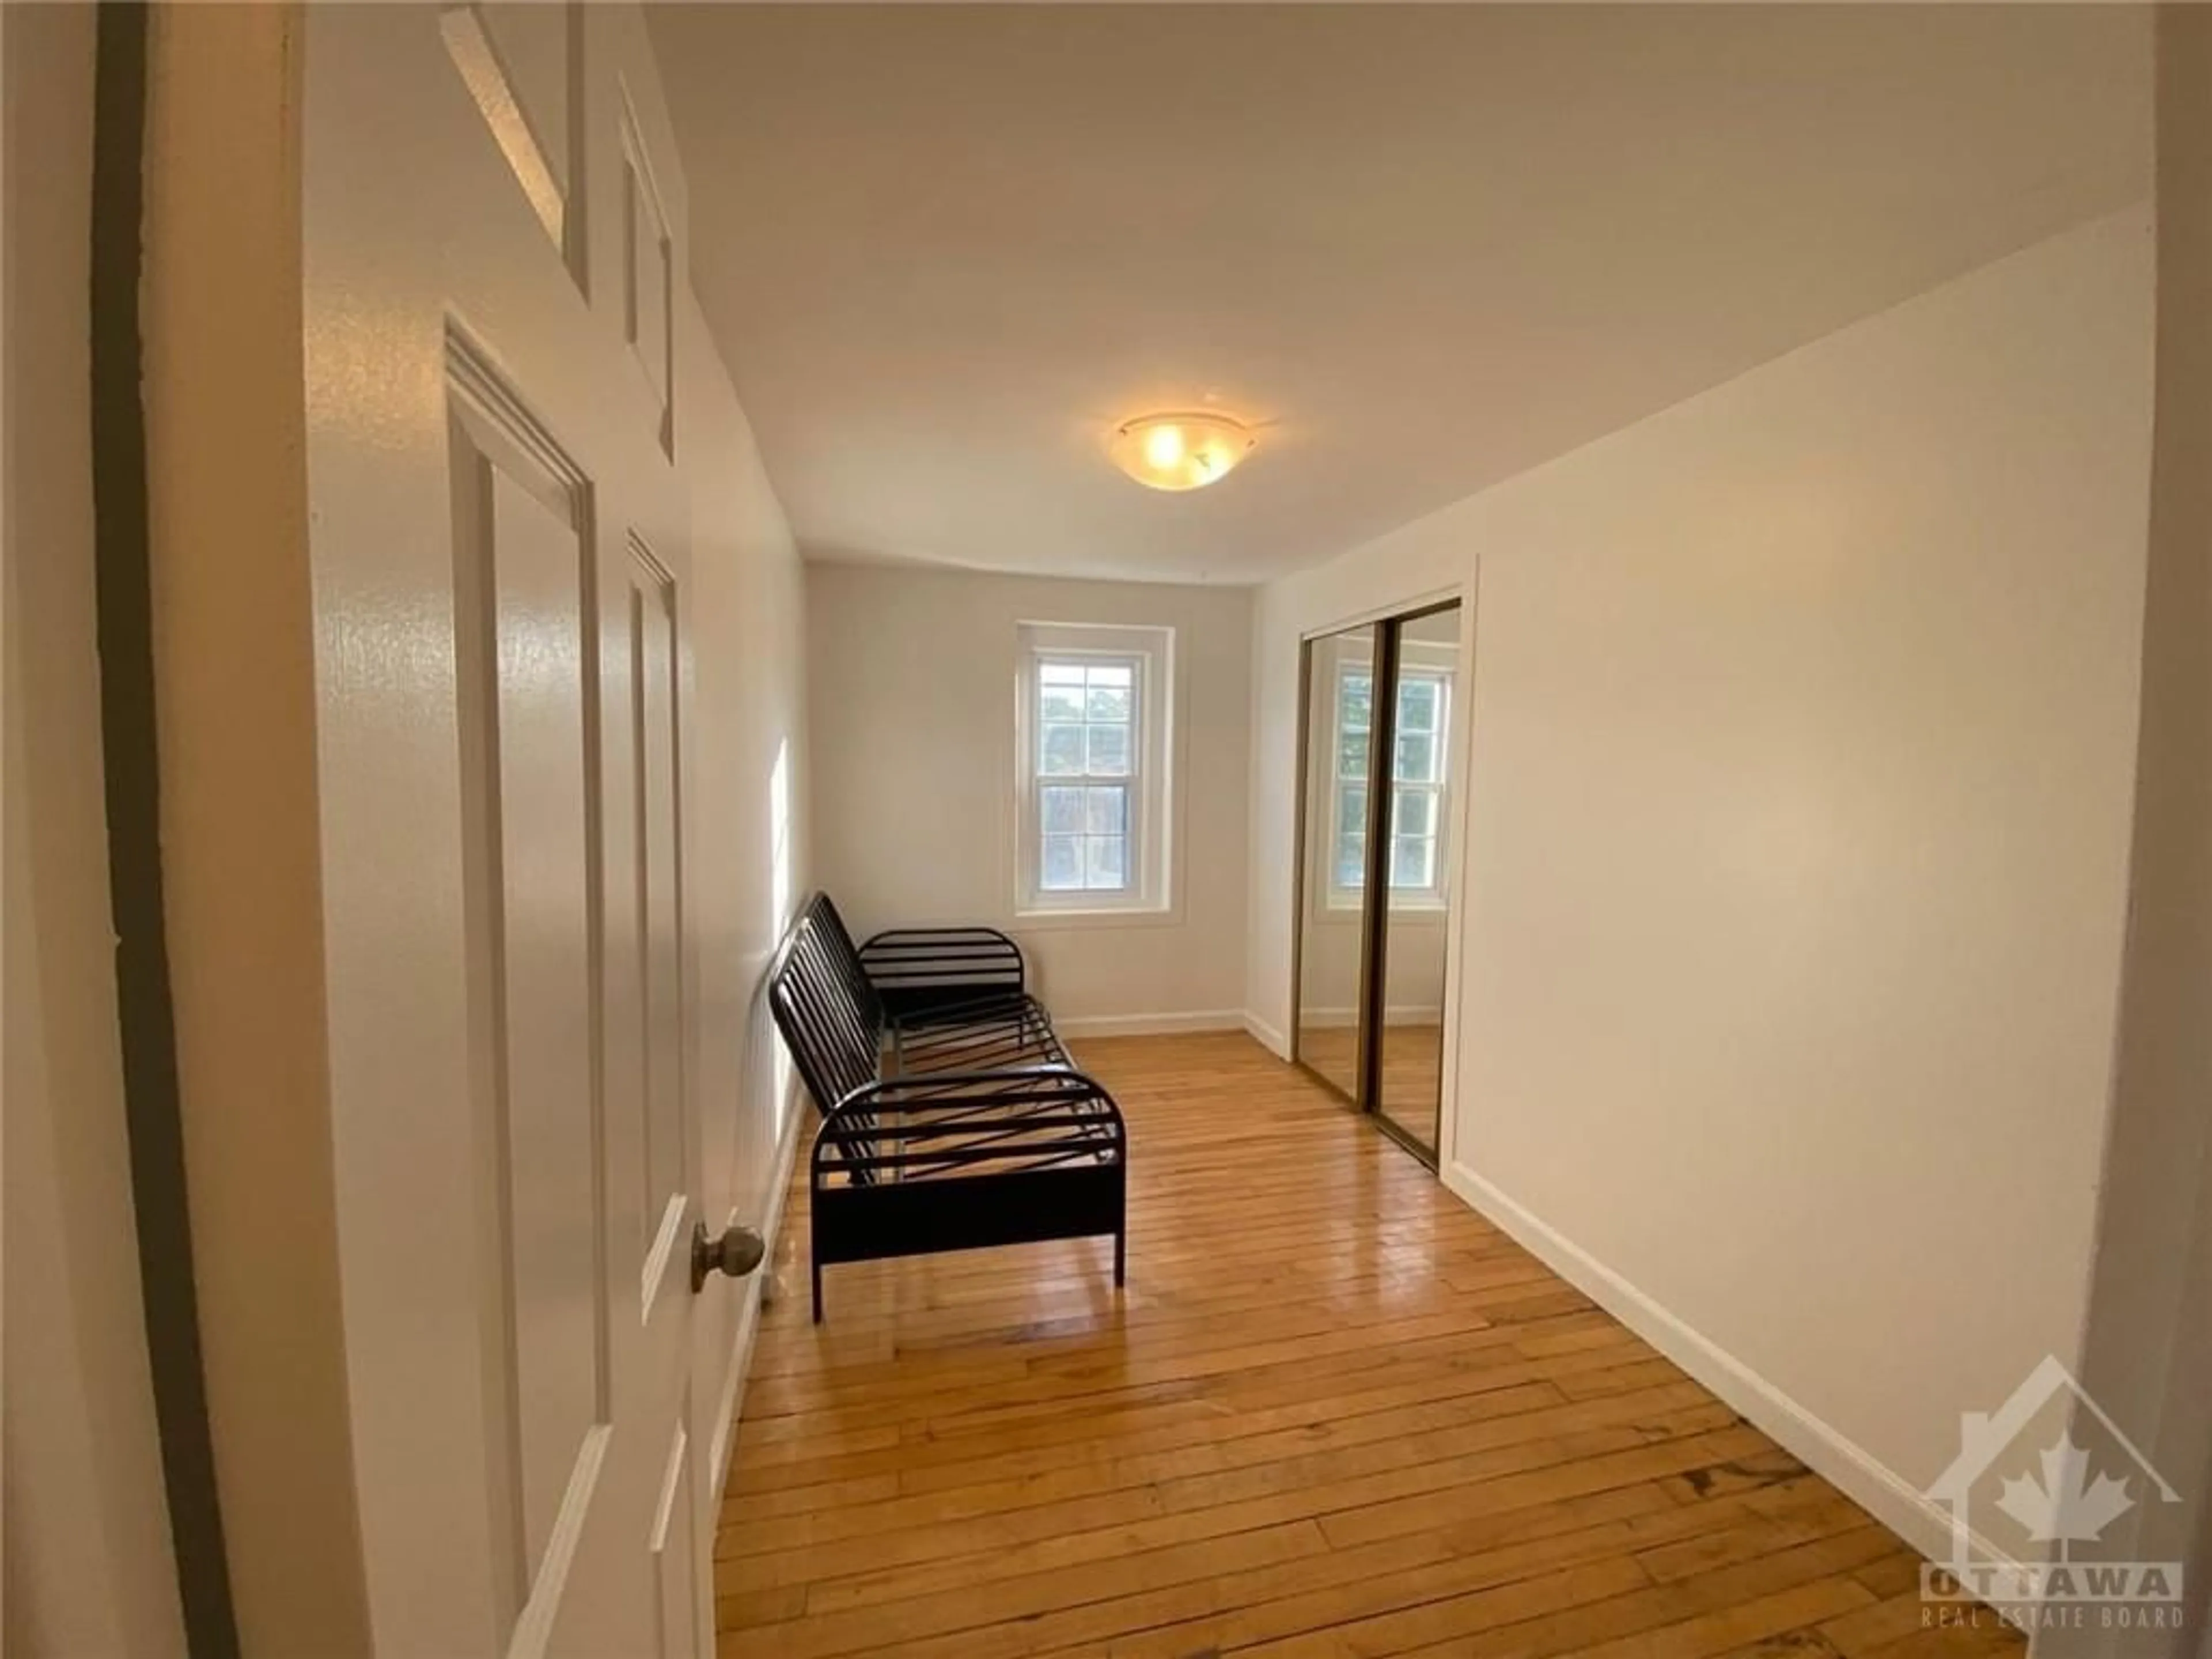 A pic of a room for 713 ST LAURENT Blvd, Ottawa Ontario K1K 3A6